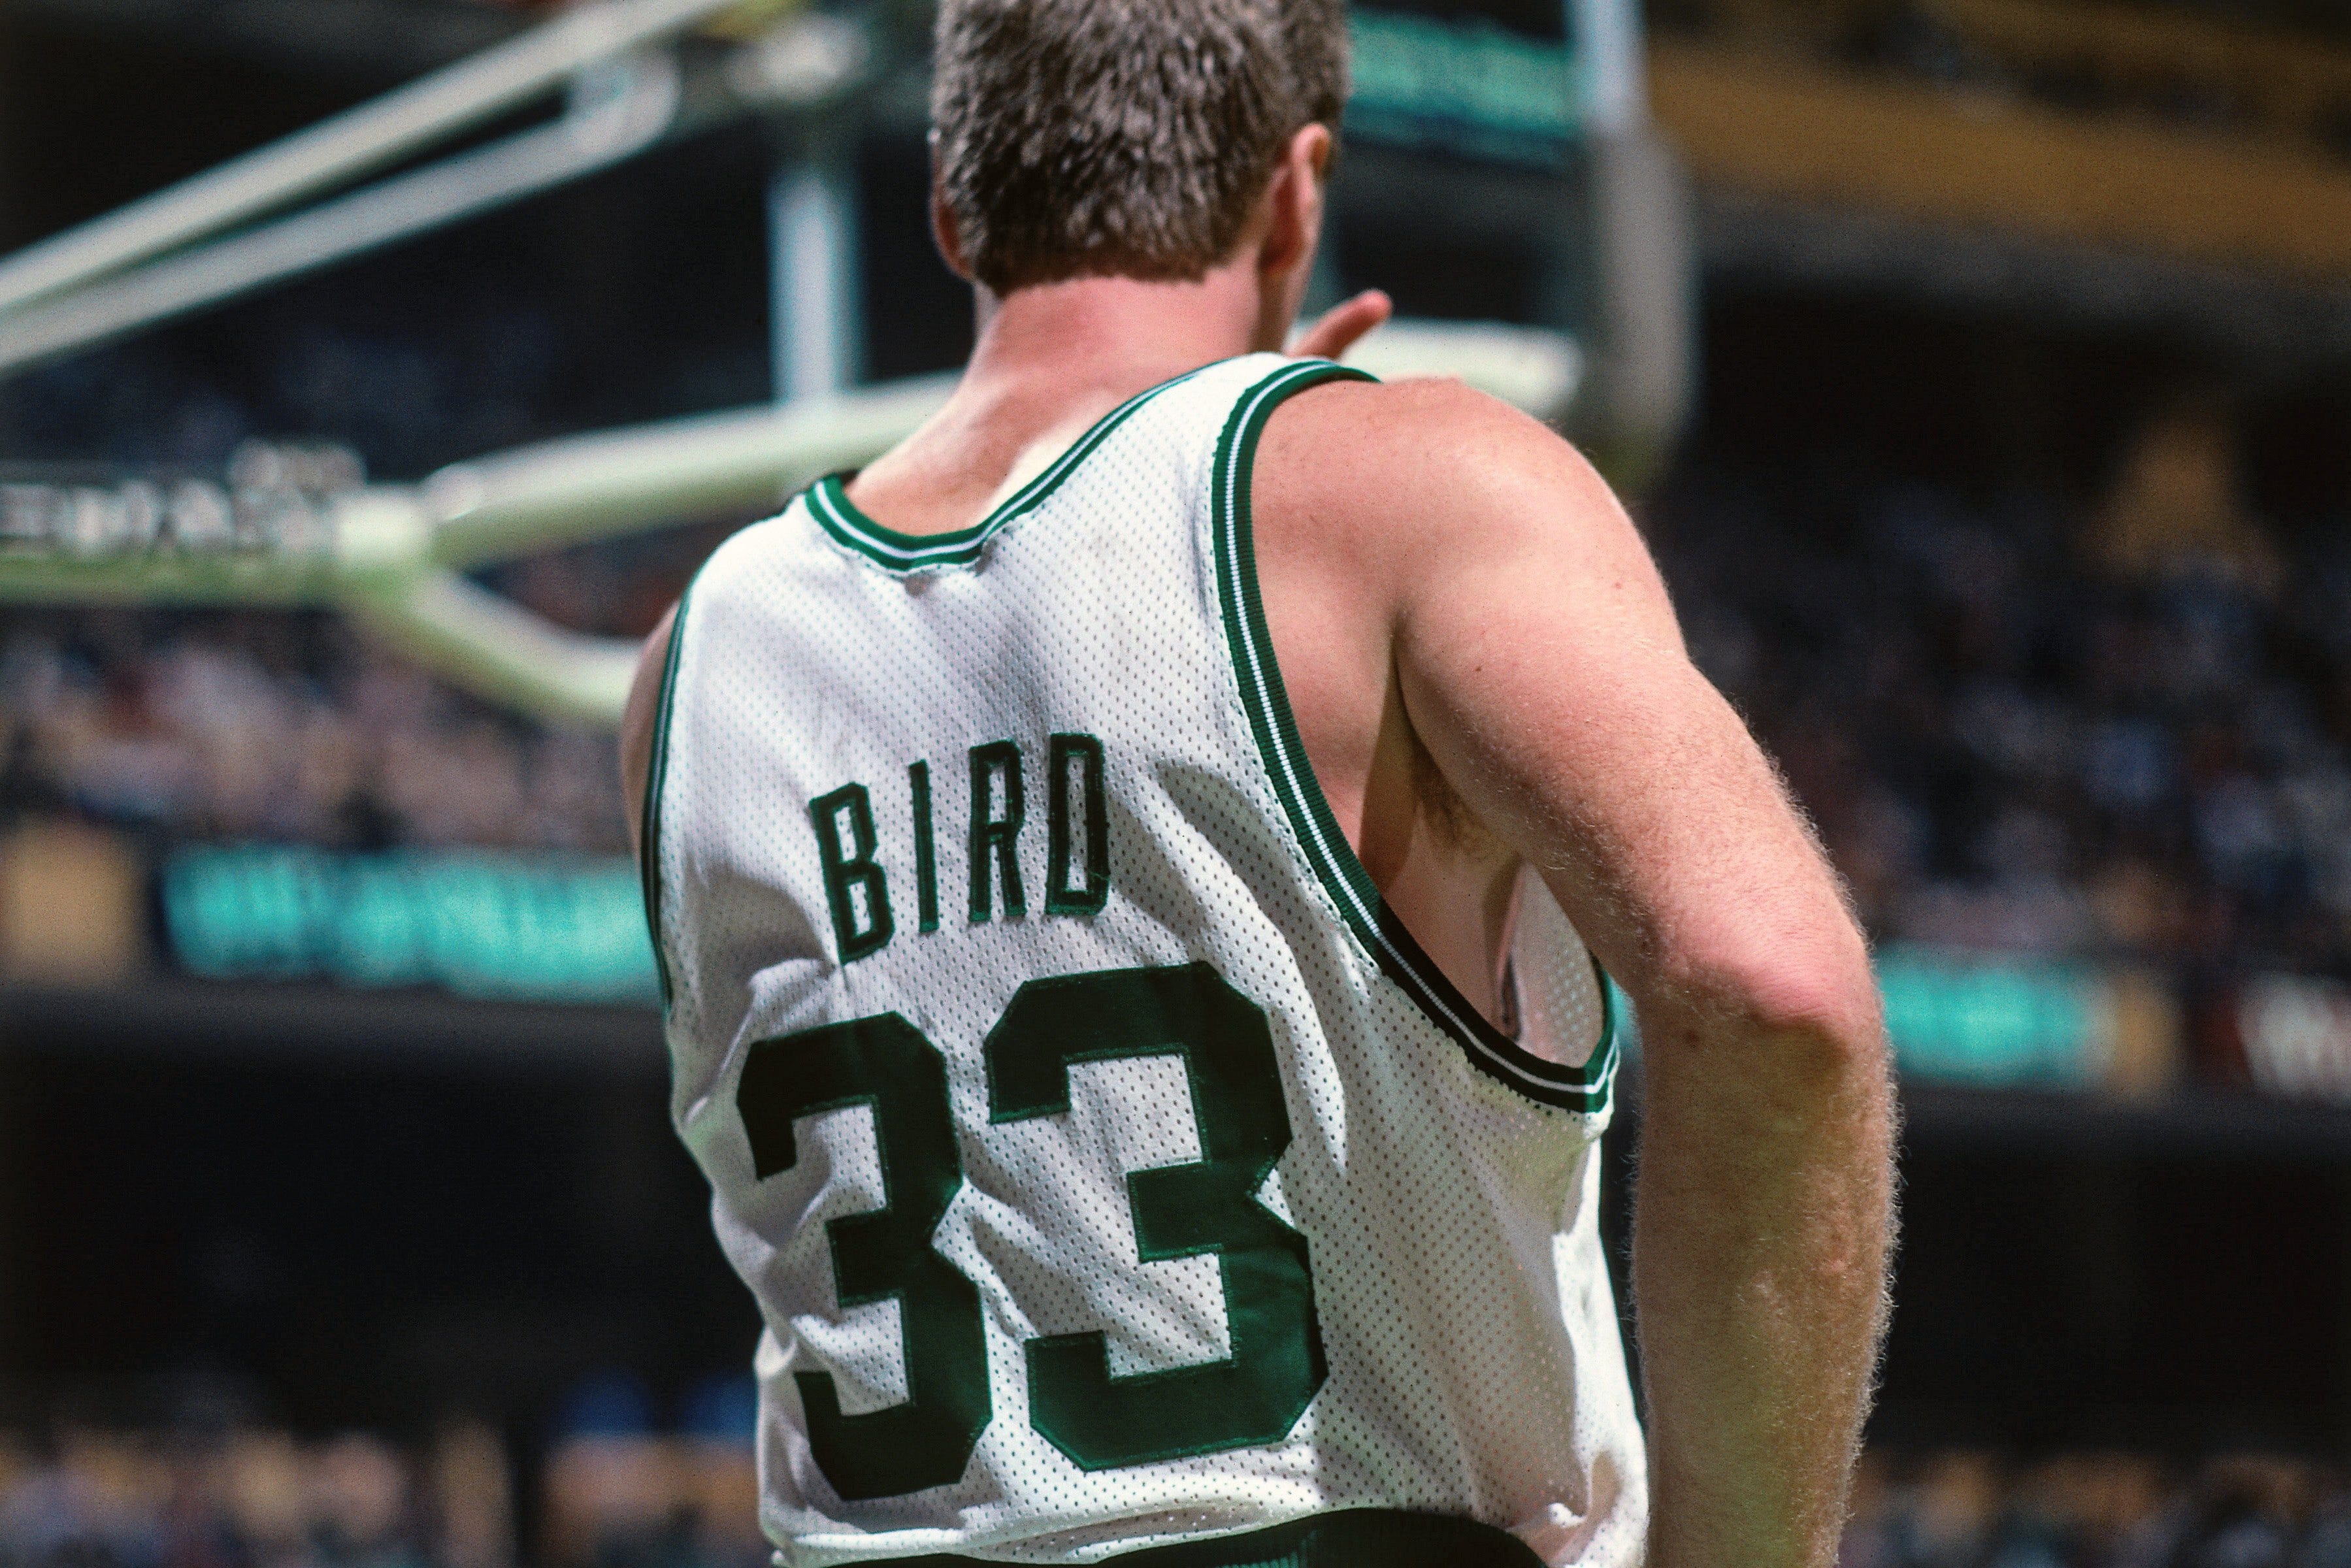 The greatest NBA player to wear every number? Larry Bird isn't 33?